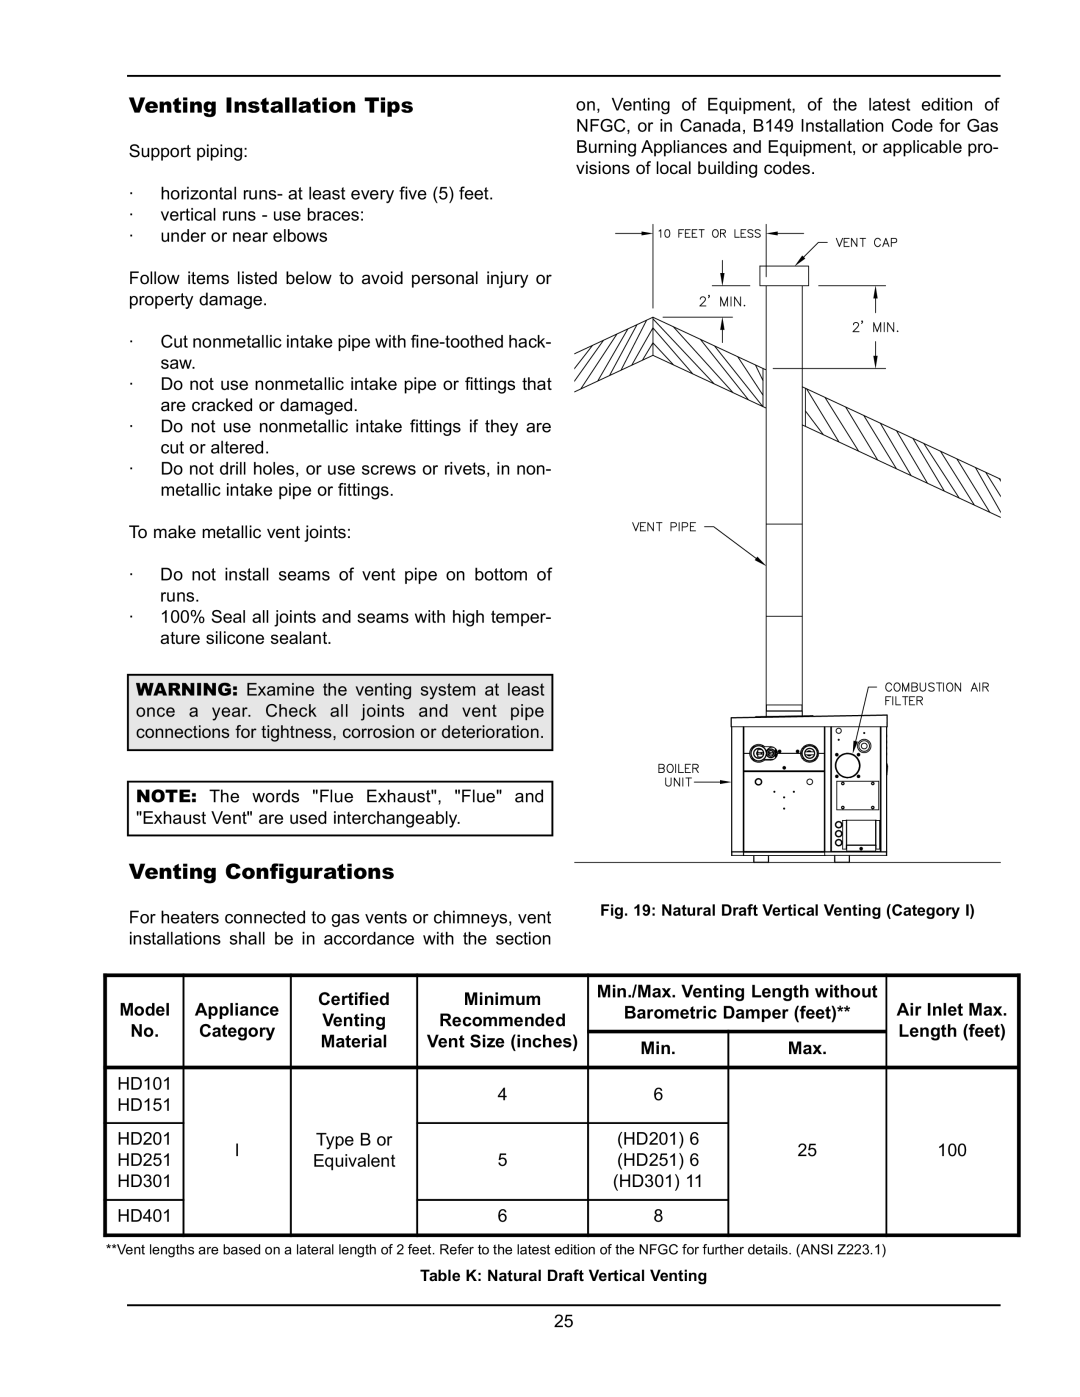 Raypak HD101, HD401 operating instructions Venting Installation Tips, Venting Configurations 